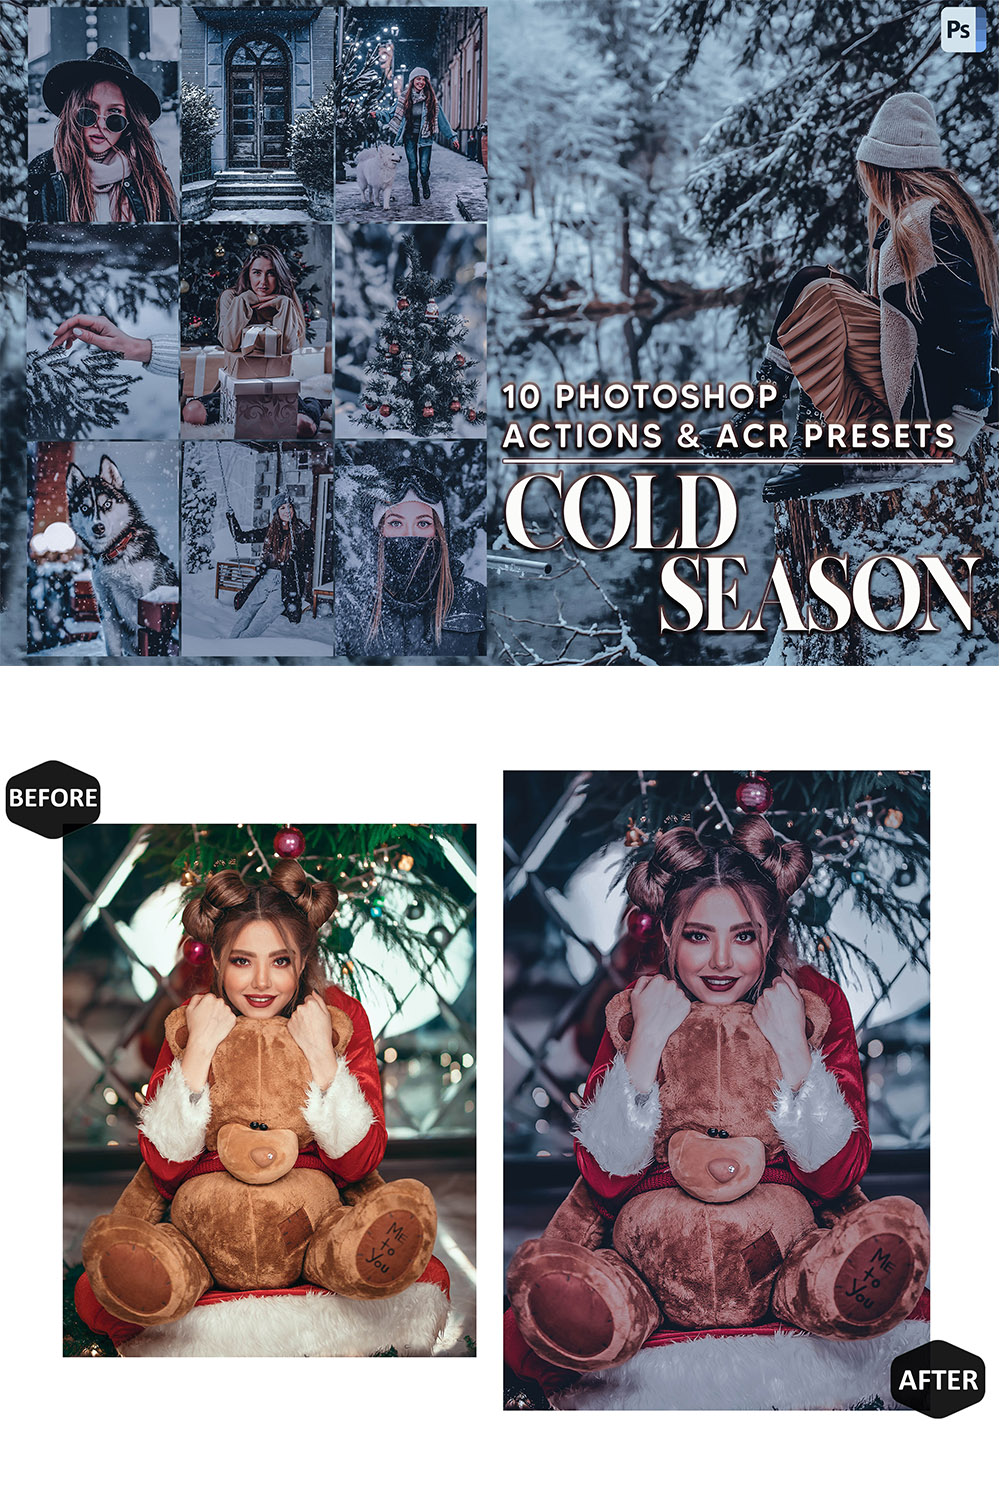 10 Photoshop Actions, Cold Season Ps Action, Blue ACR Preset, Moody Ps Filter, Snow Portrait And Lifestyle Theme For Instagram, Blogger pinterest preview image.